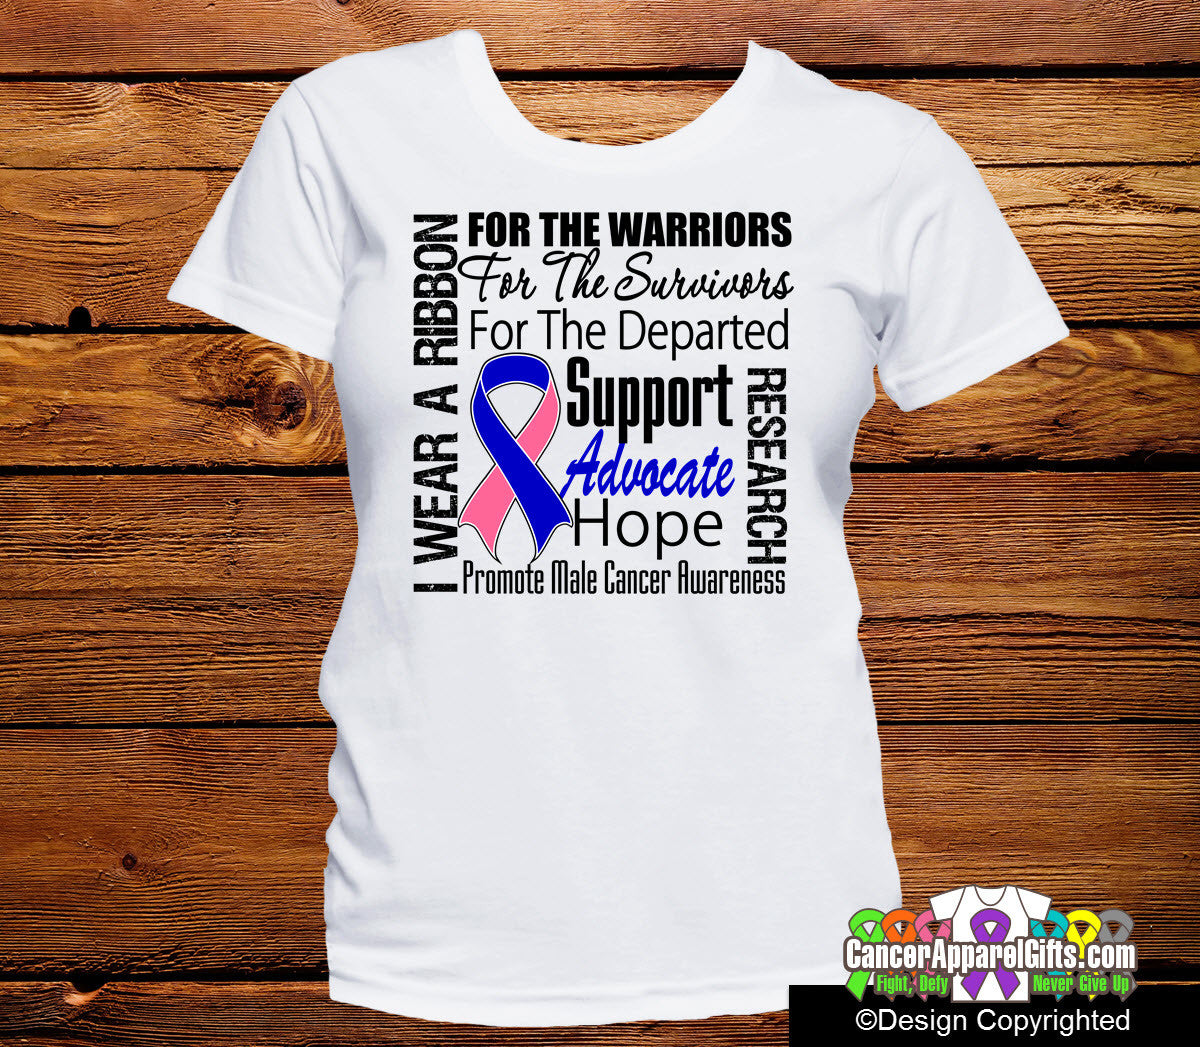 Male Breast Cancer Tribute Shirts